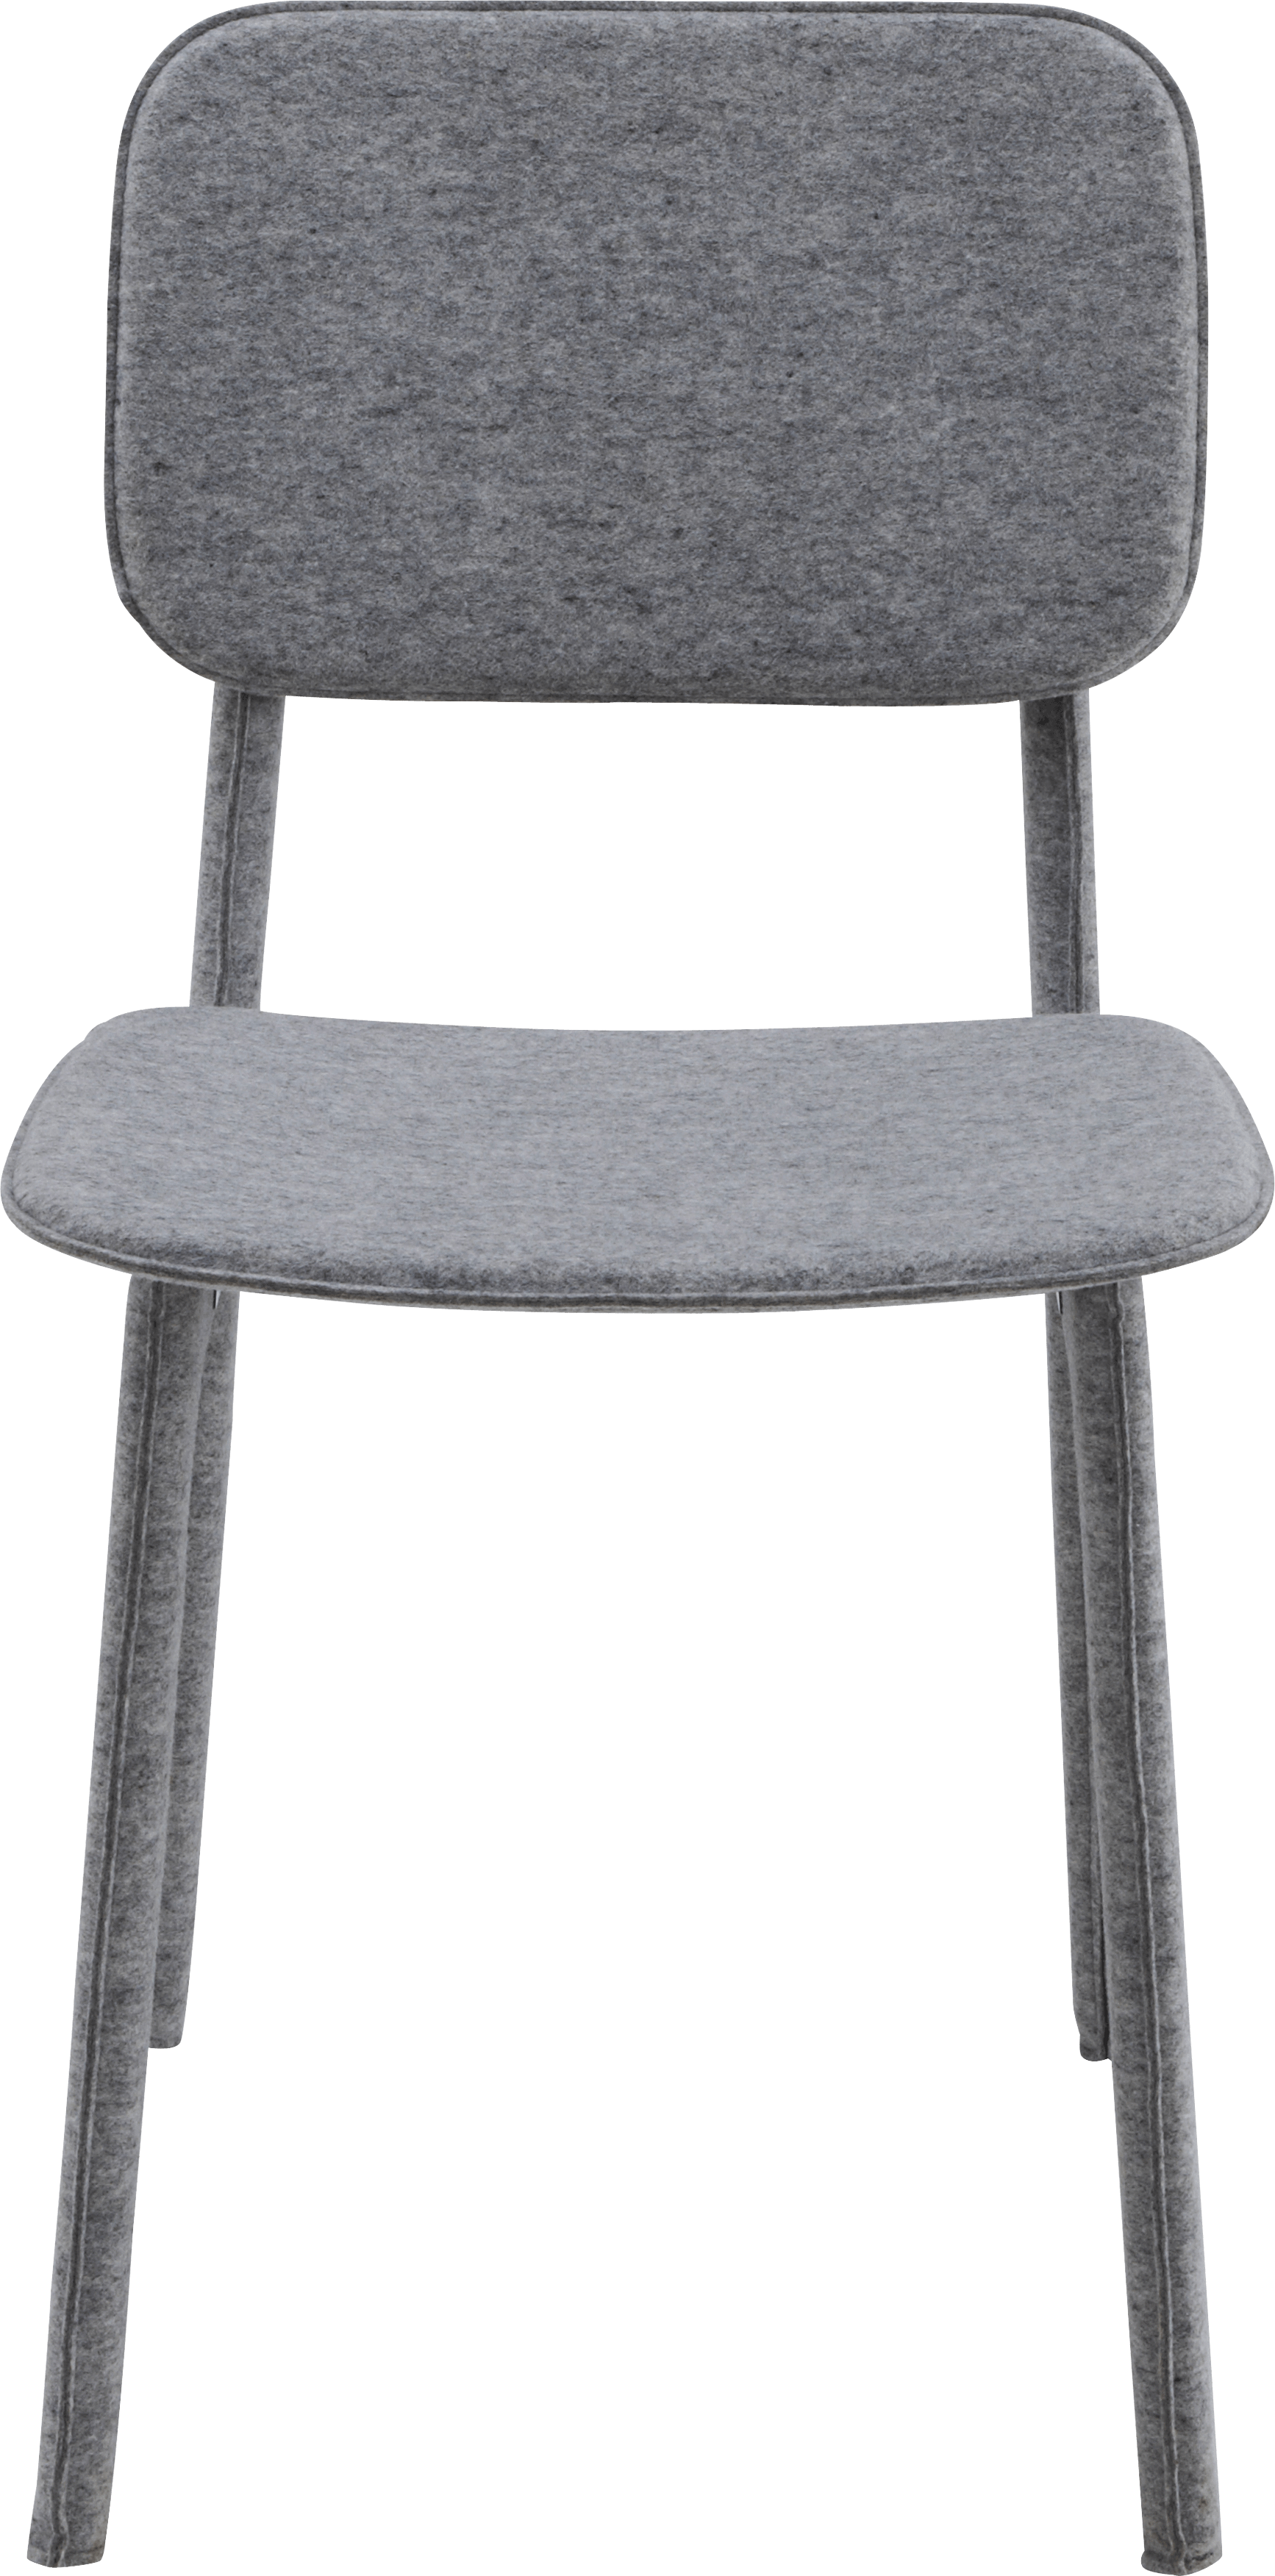 Chair Png Image PNG Image